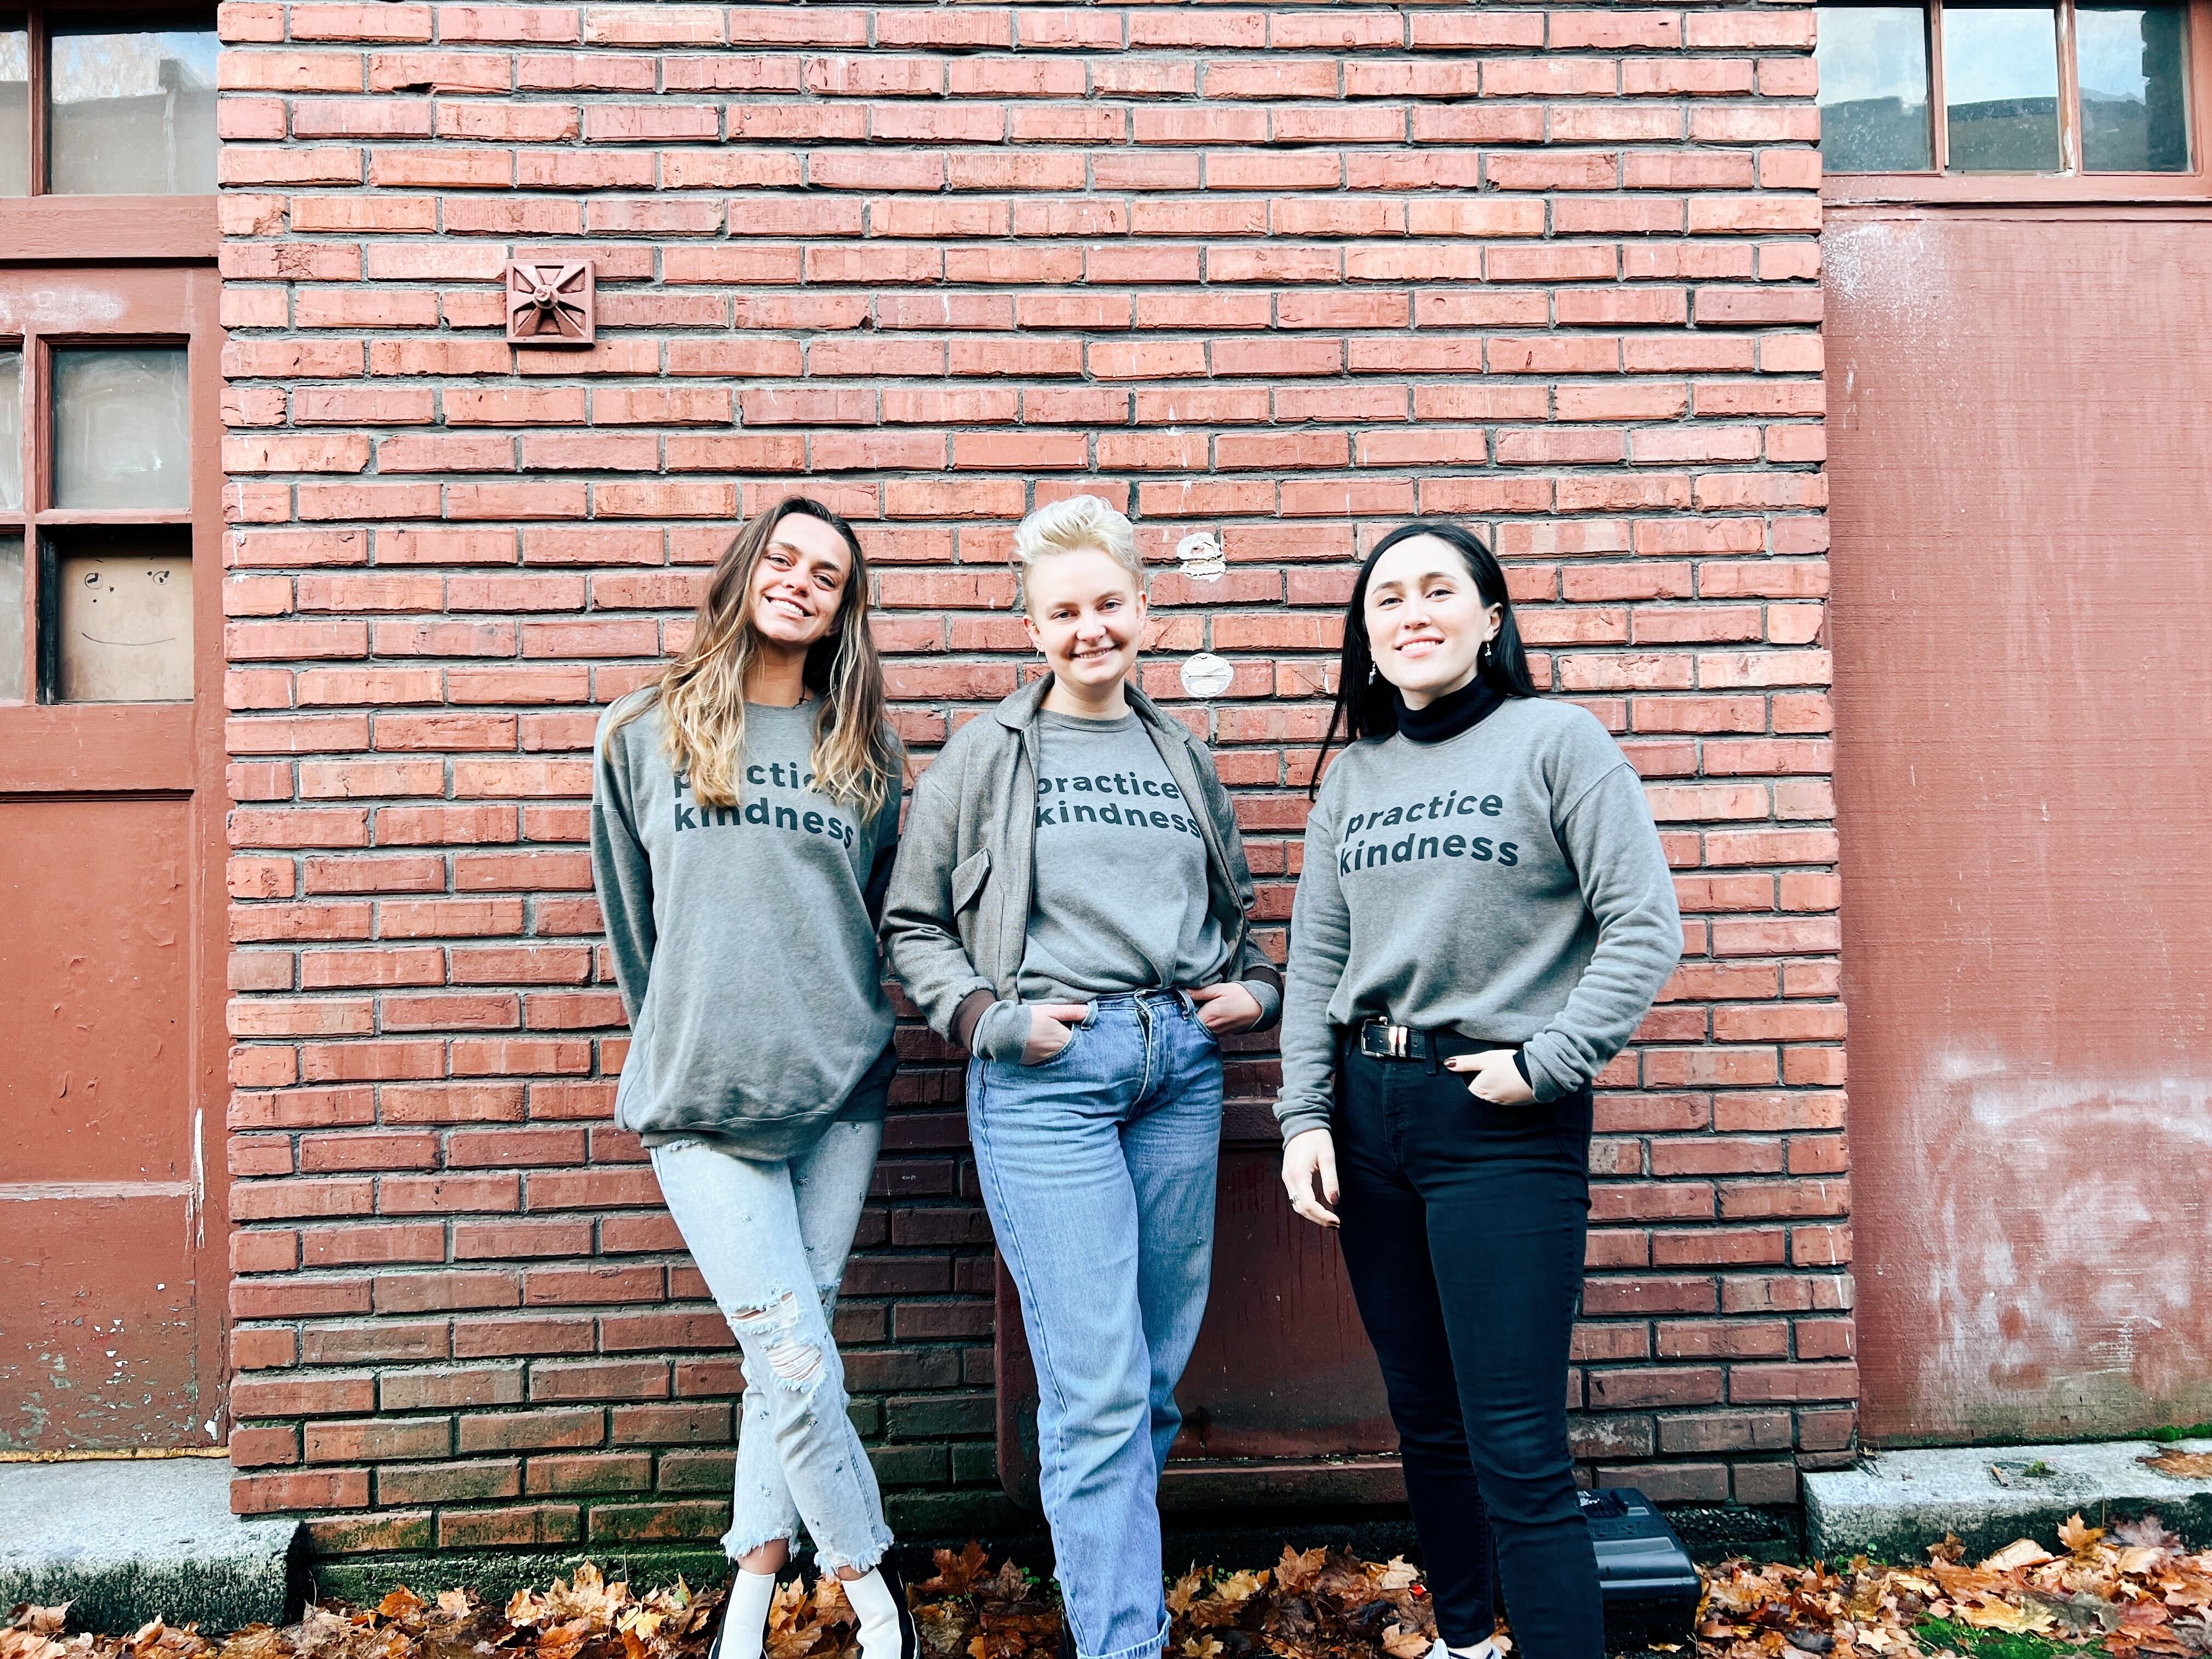 3 people stand with gray sweatshirts on that say Practice Kindness in dark gray bold font.